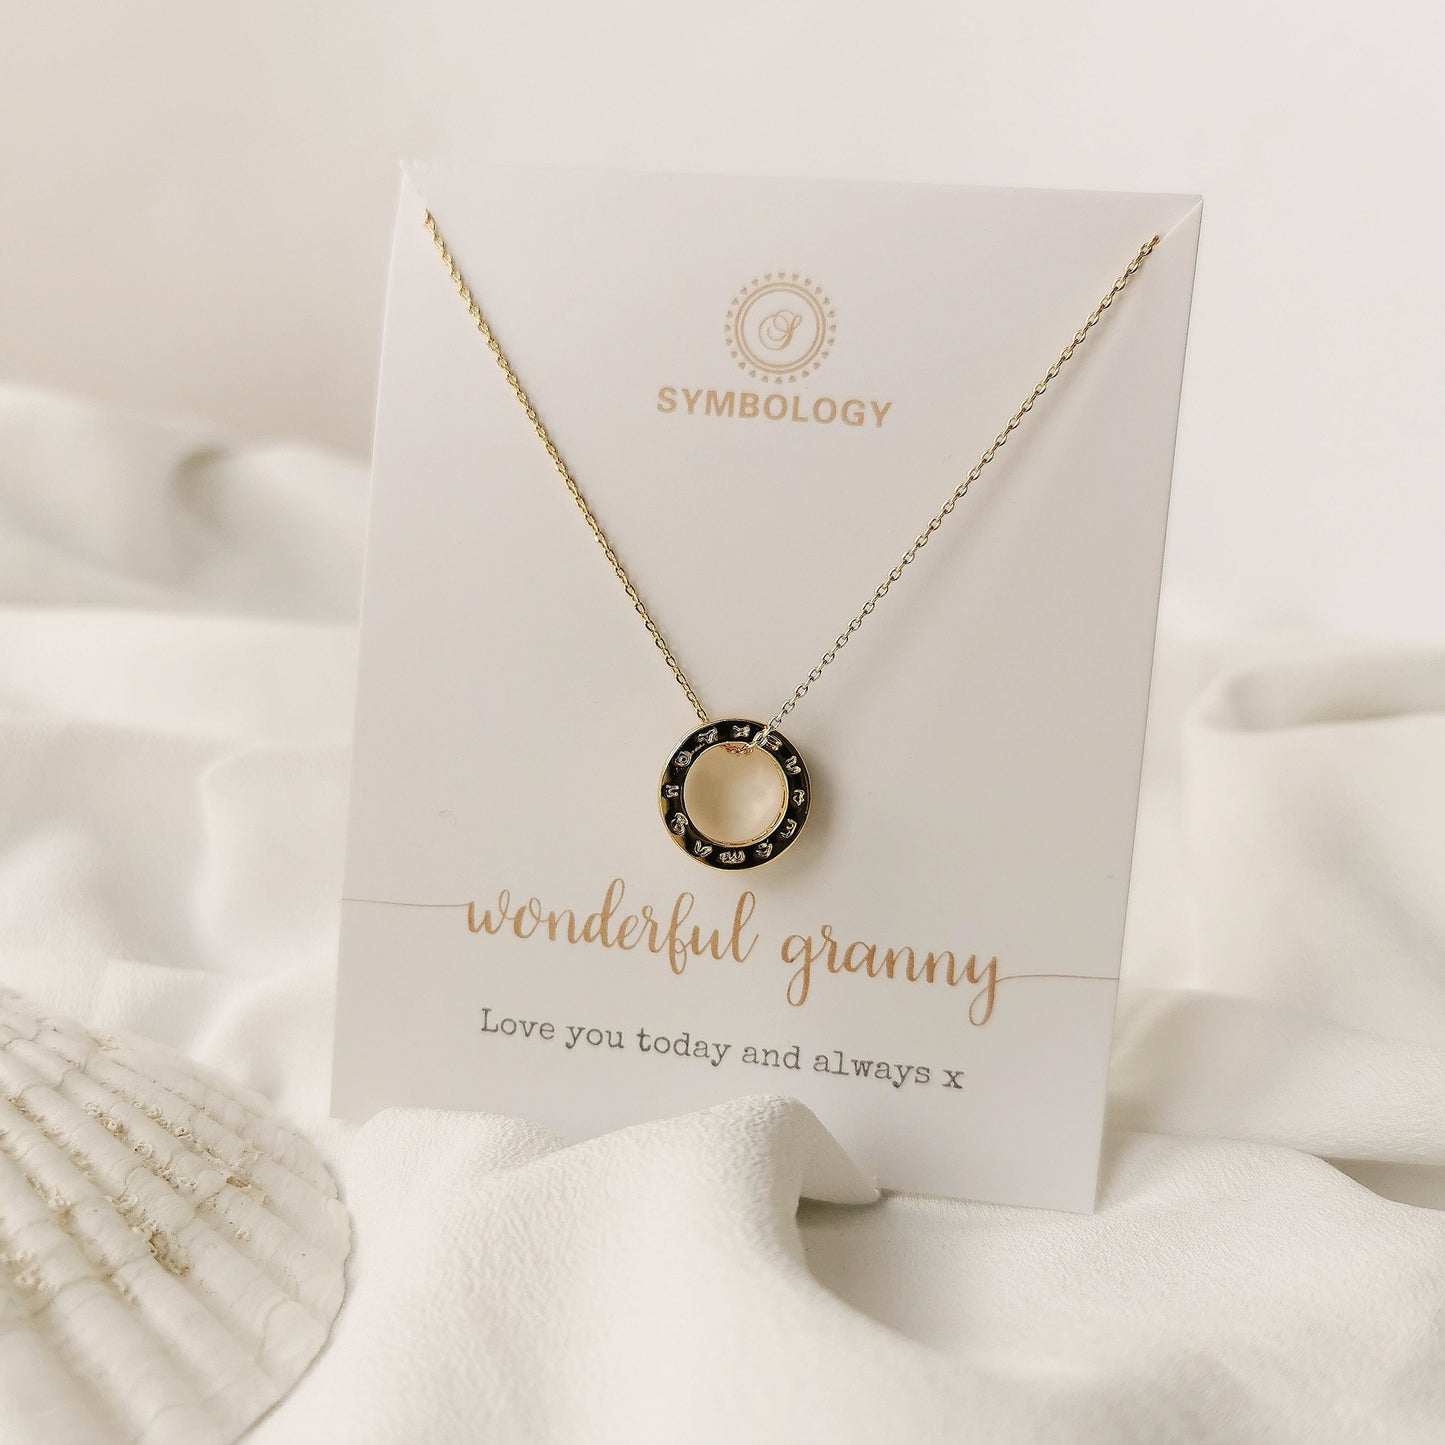 Wonderful Granny Gold Sparkly Necklace /CZ Crystal Love Heart Necklace /Mother's Day Family Gift For Grandmother with Gift Box /Gift for Her